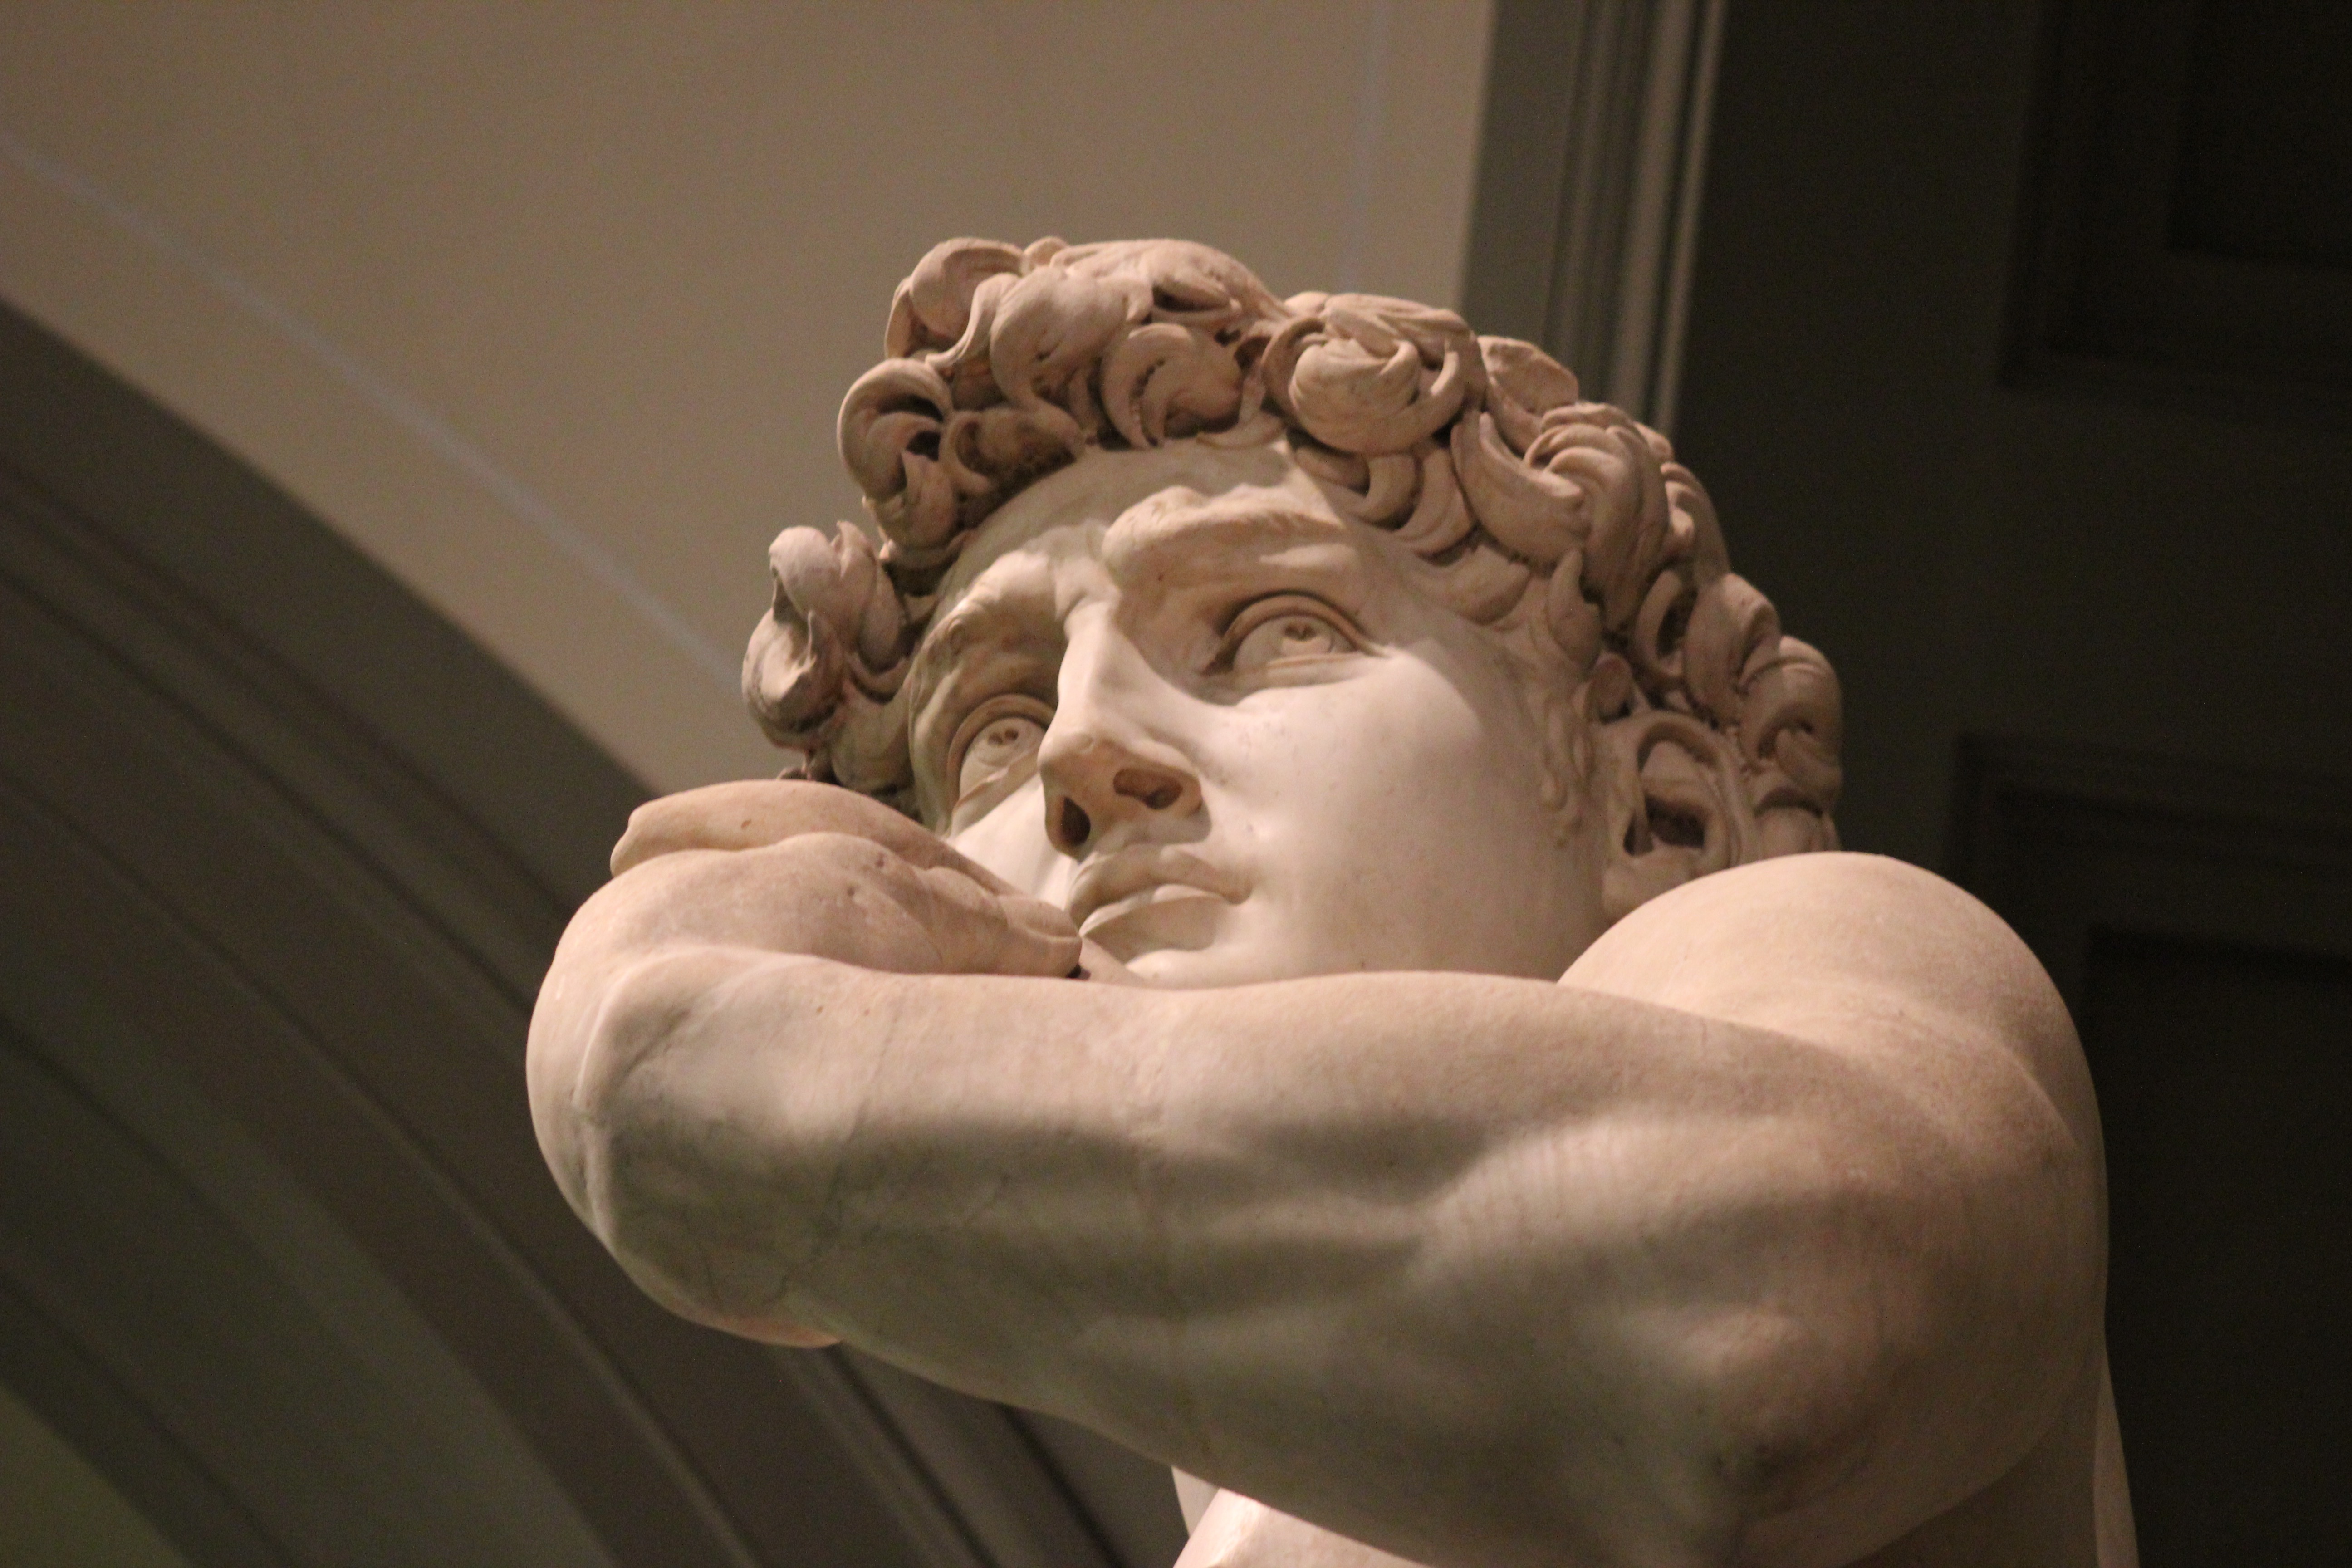 Looking up at the arm and face of the statue of David.